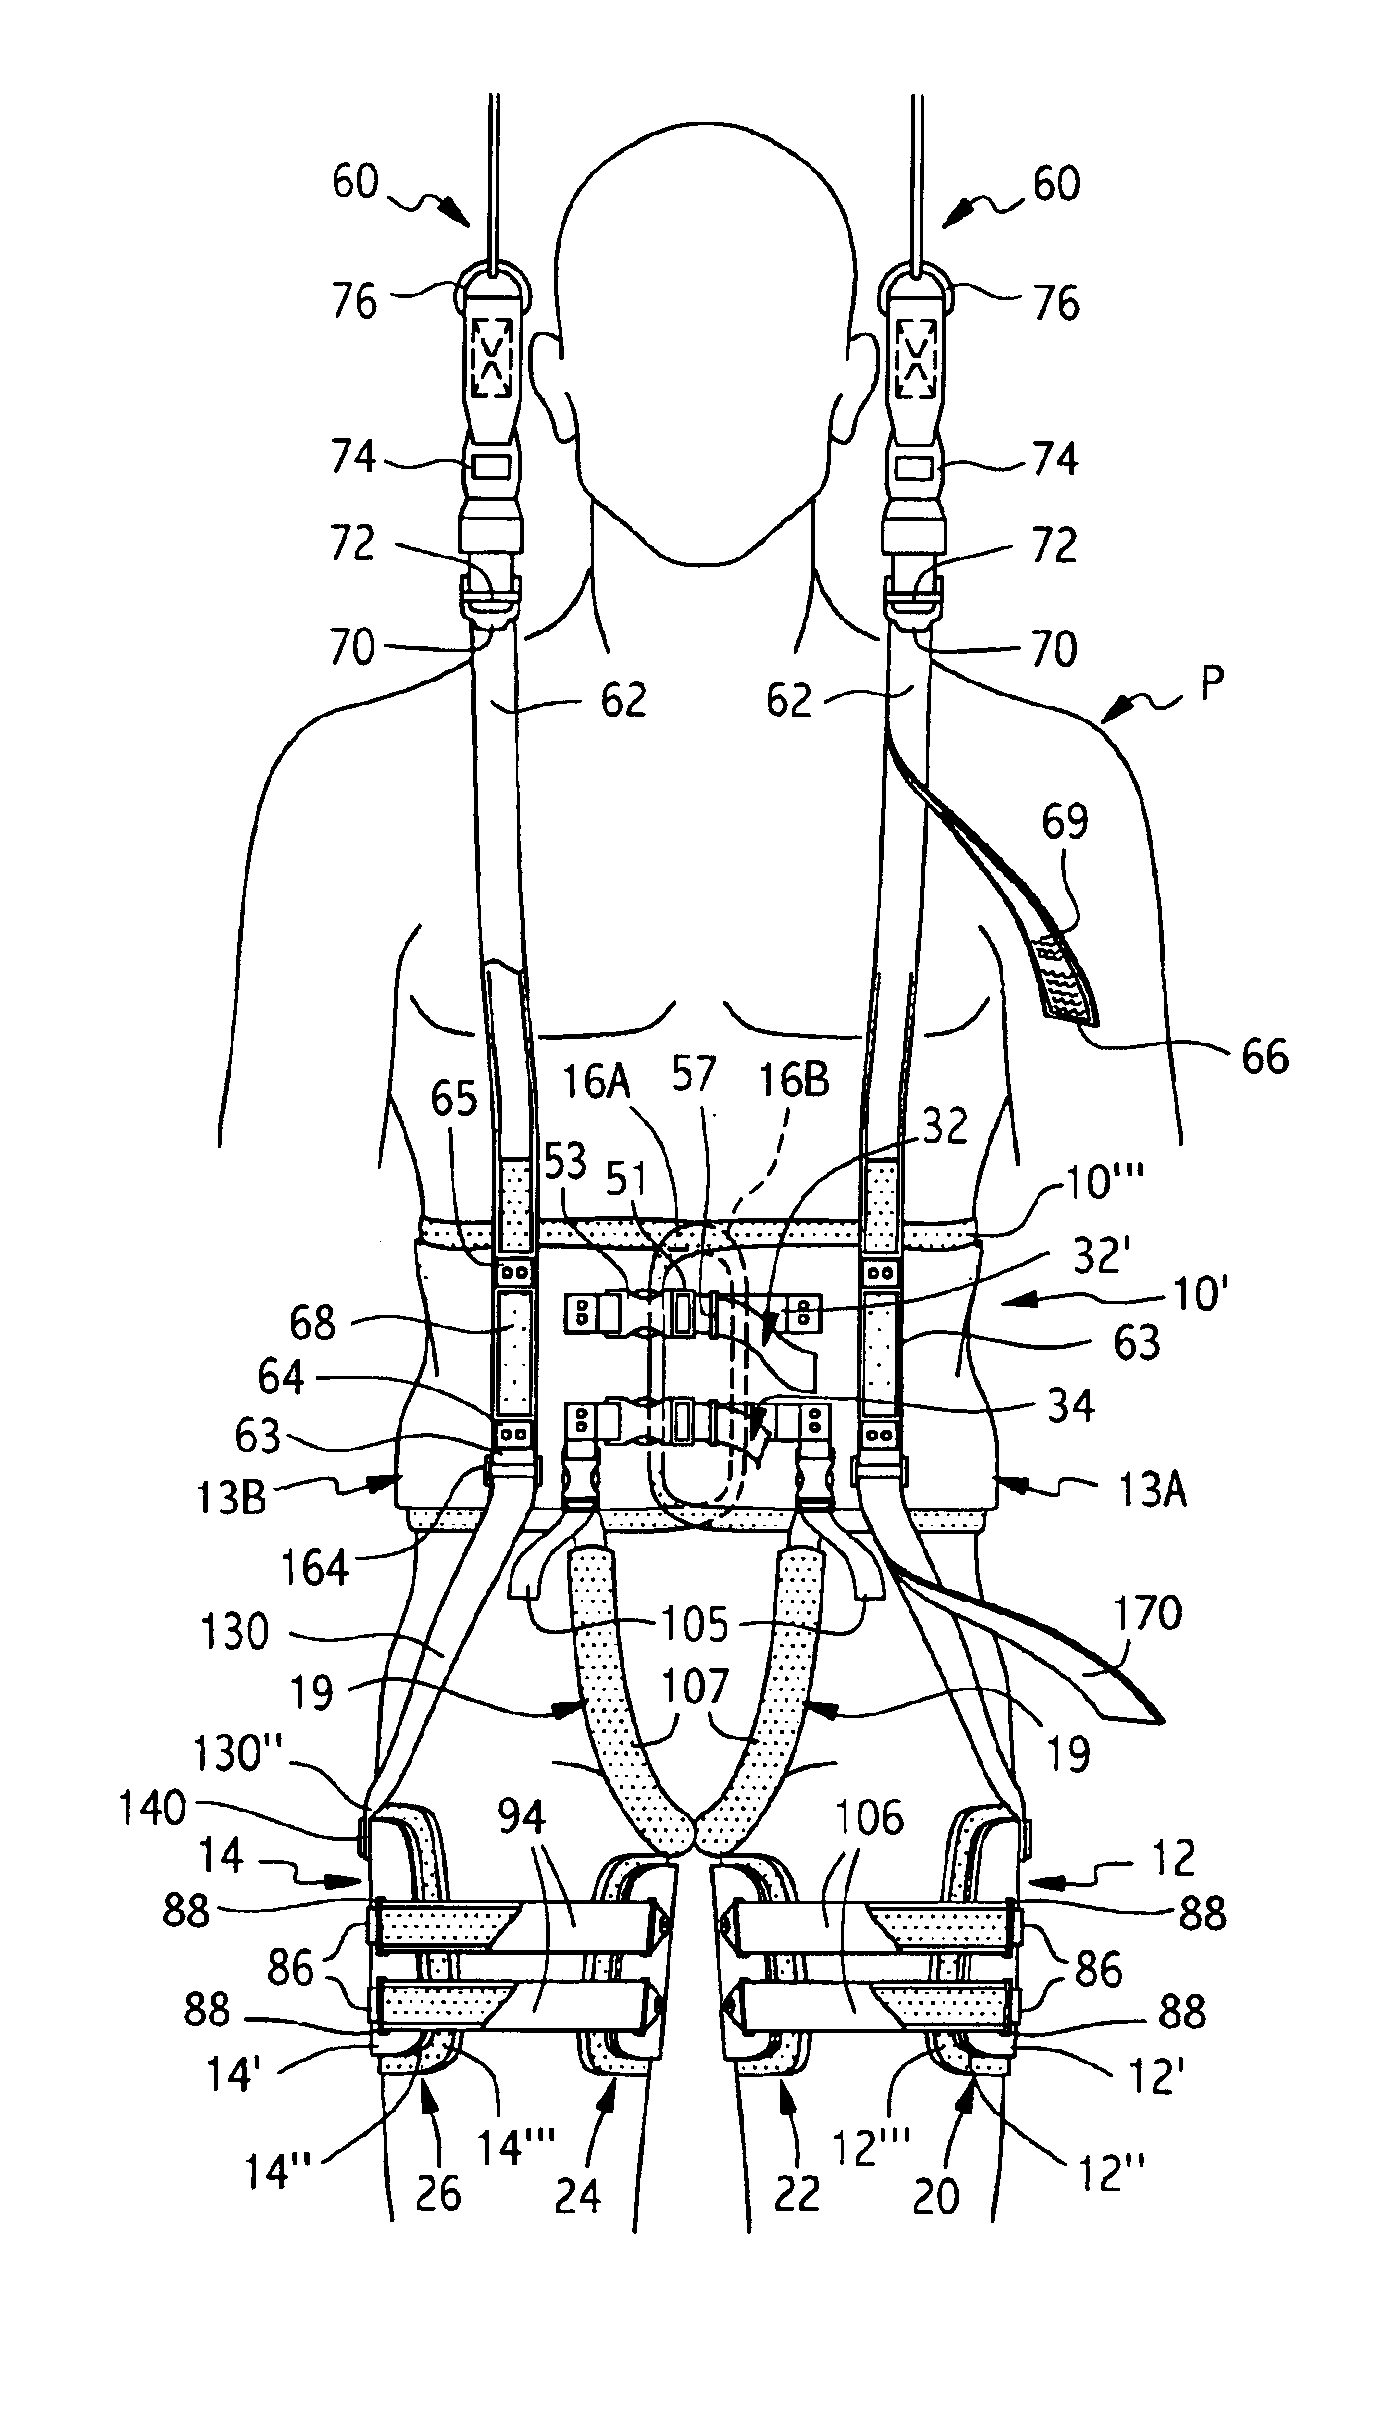 Body support harness